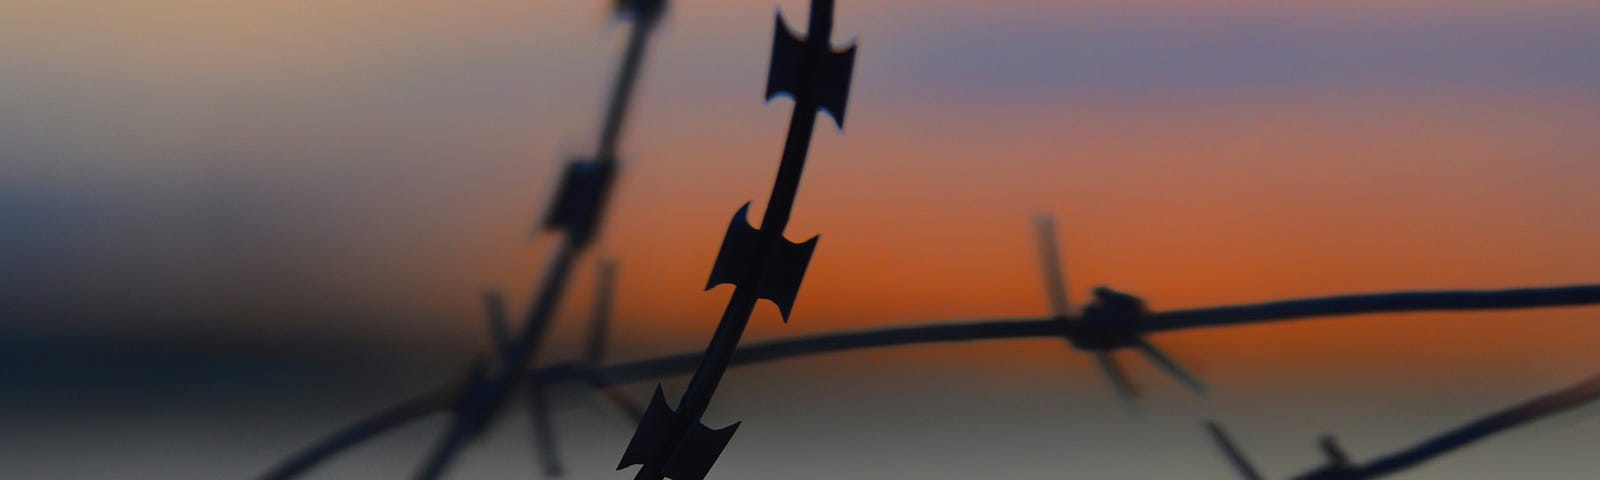 Barbed wire at Sunset